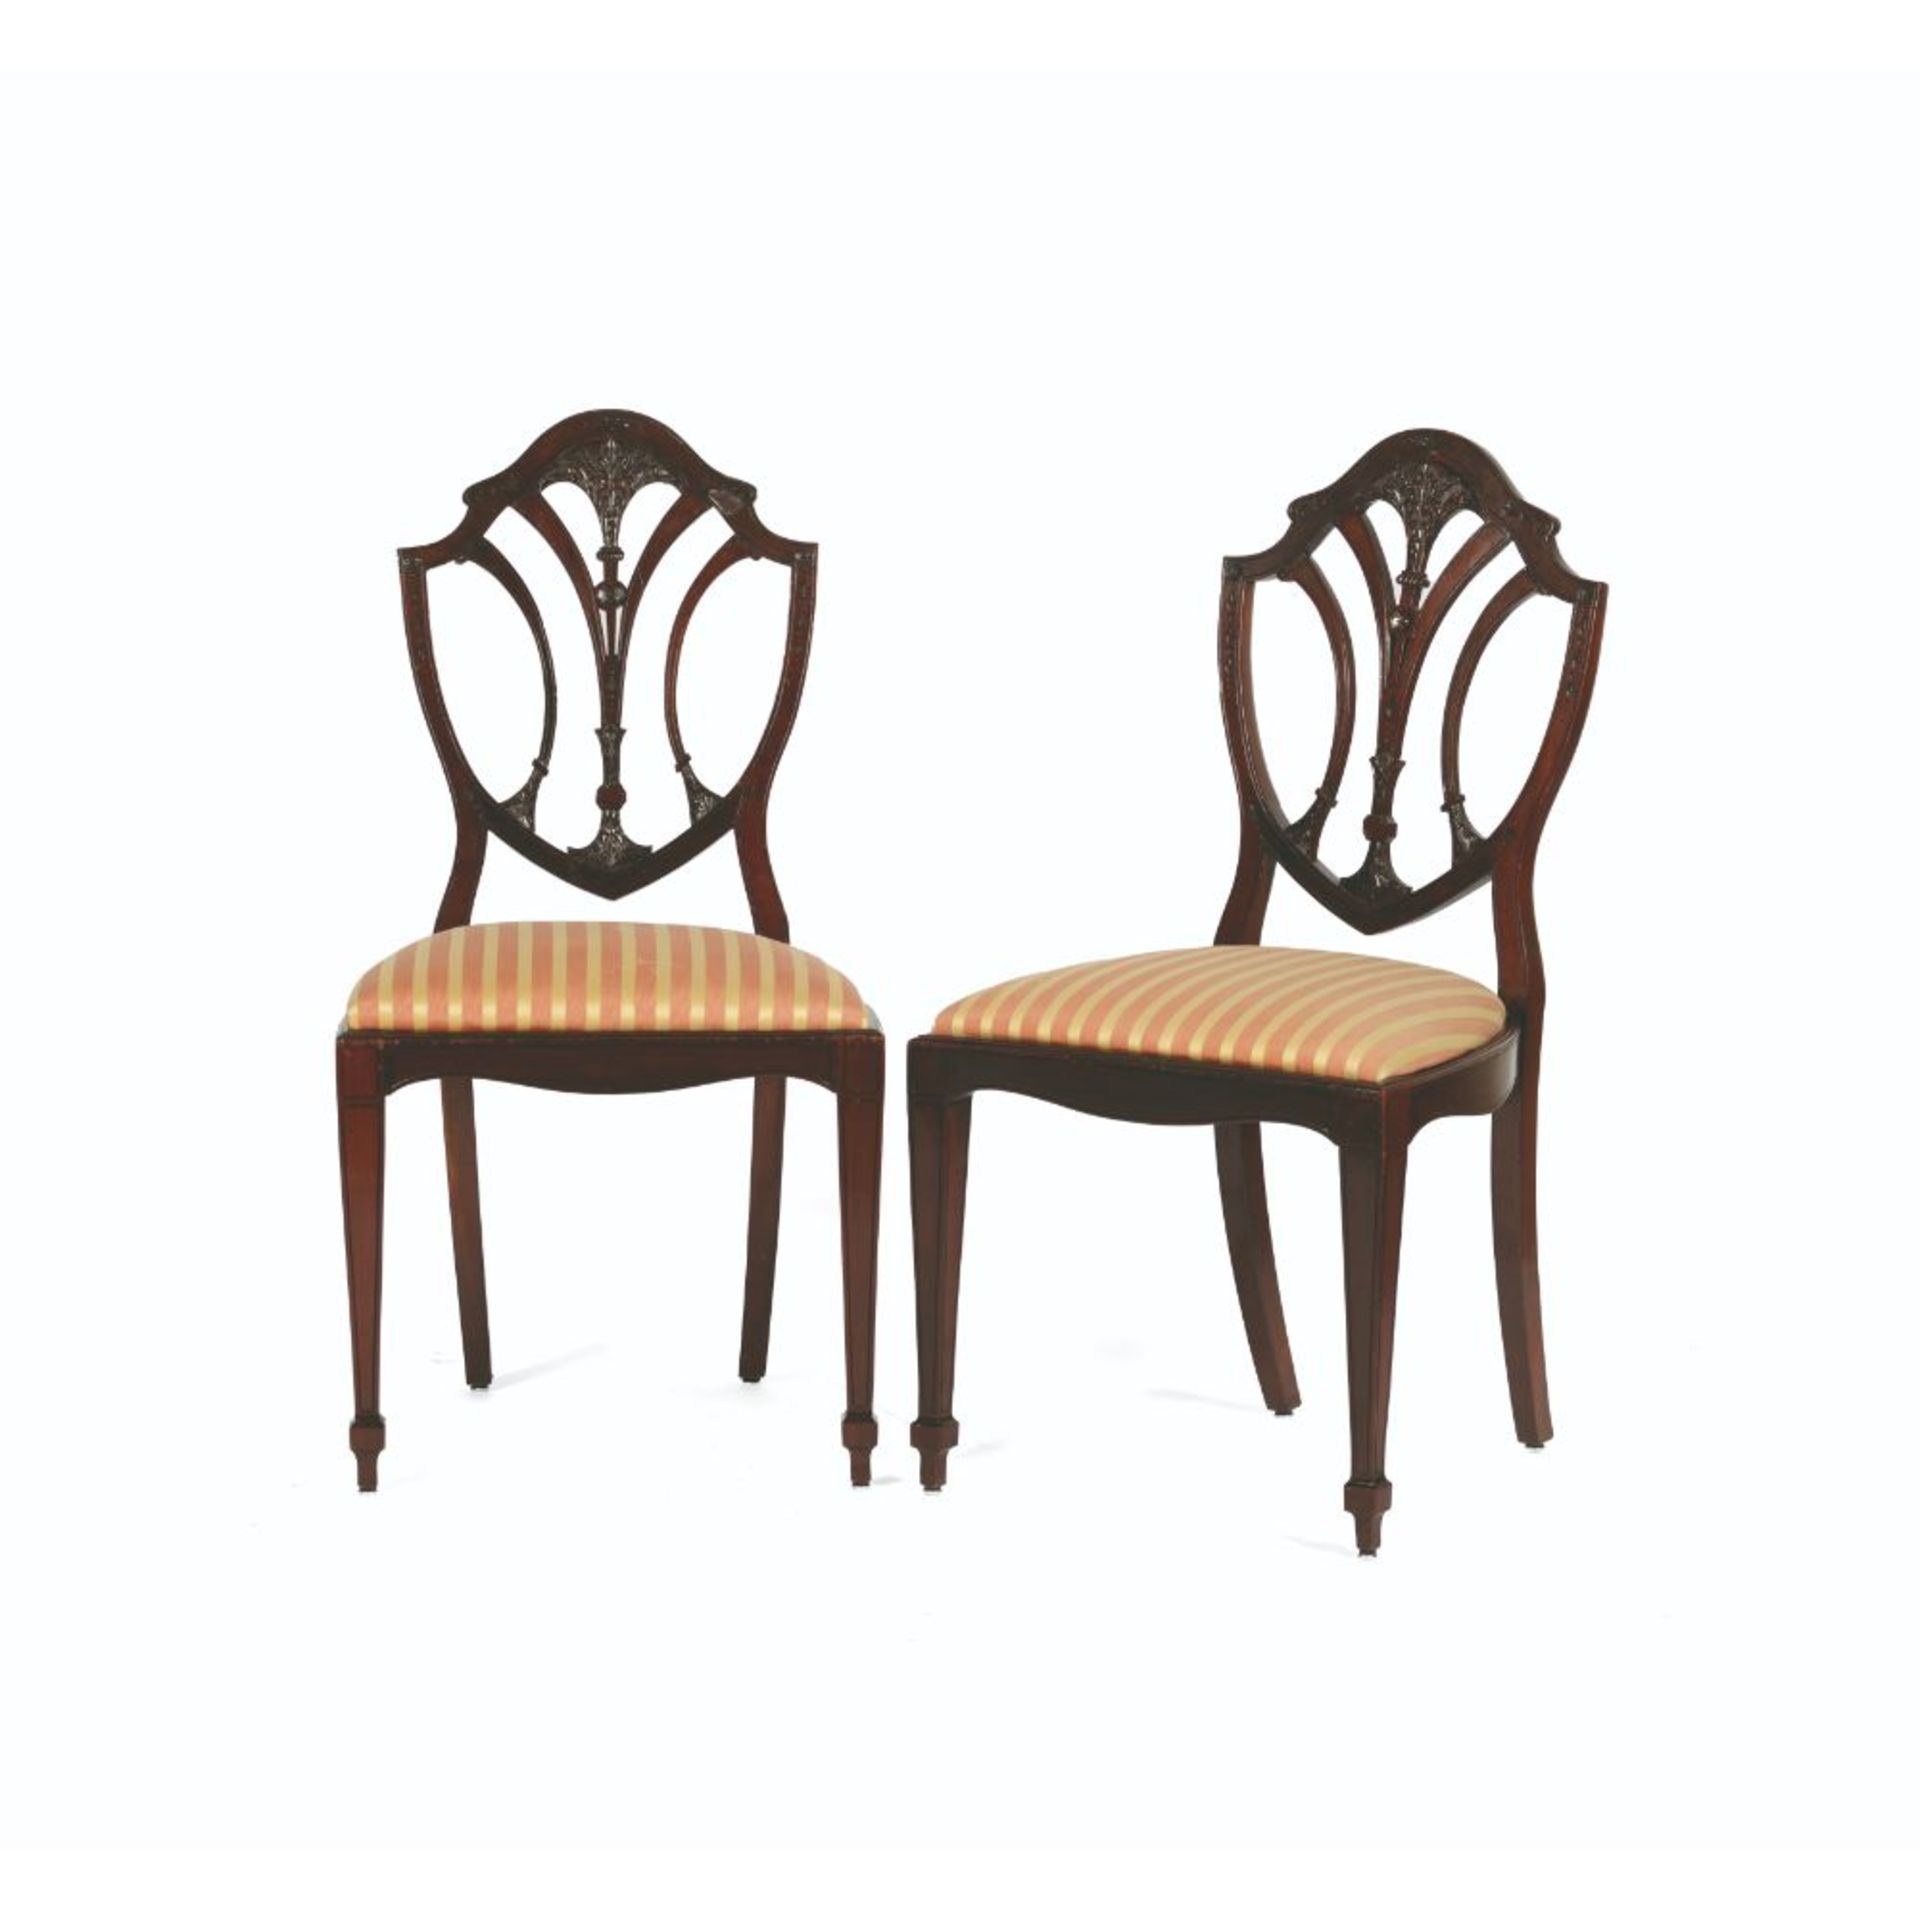 A set of four Hepplewhite style chairs, Mahogany, Pierced and carved splats, Textile upholstered